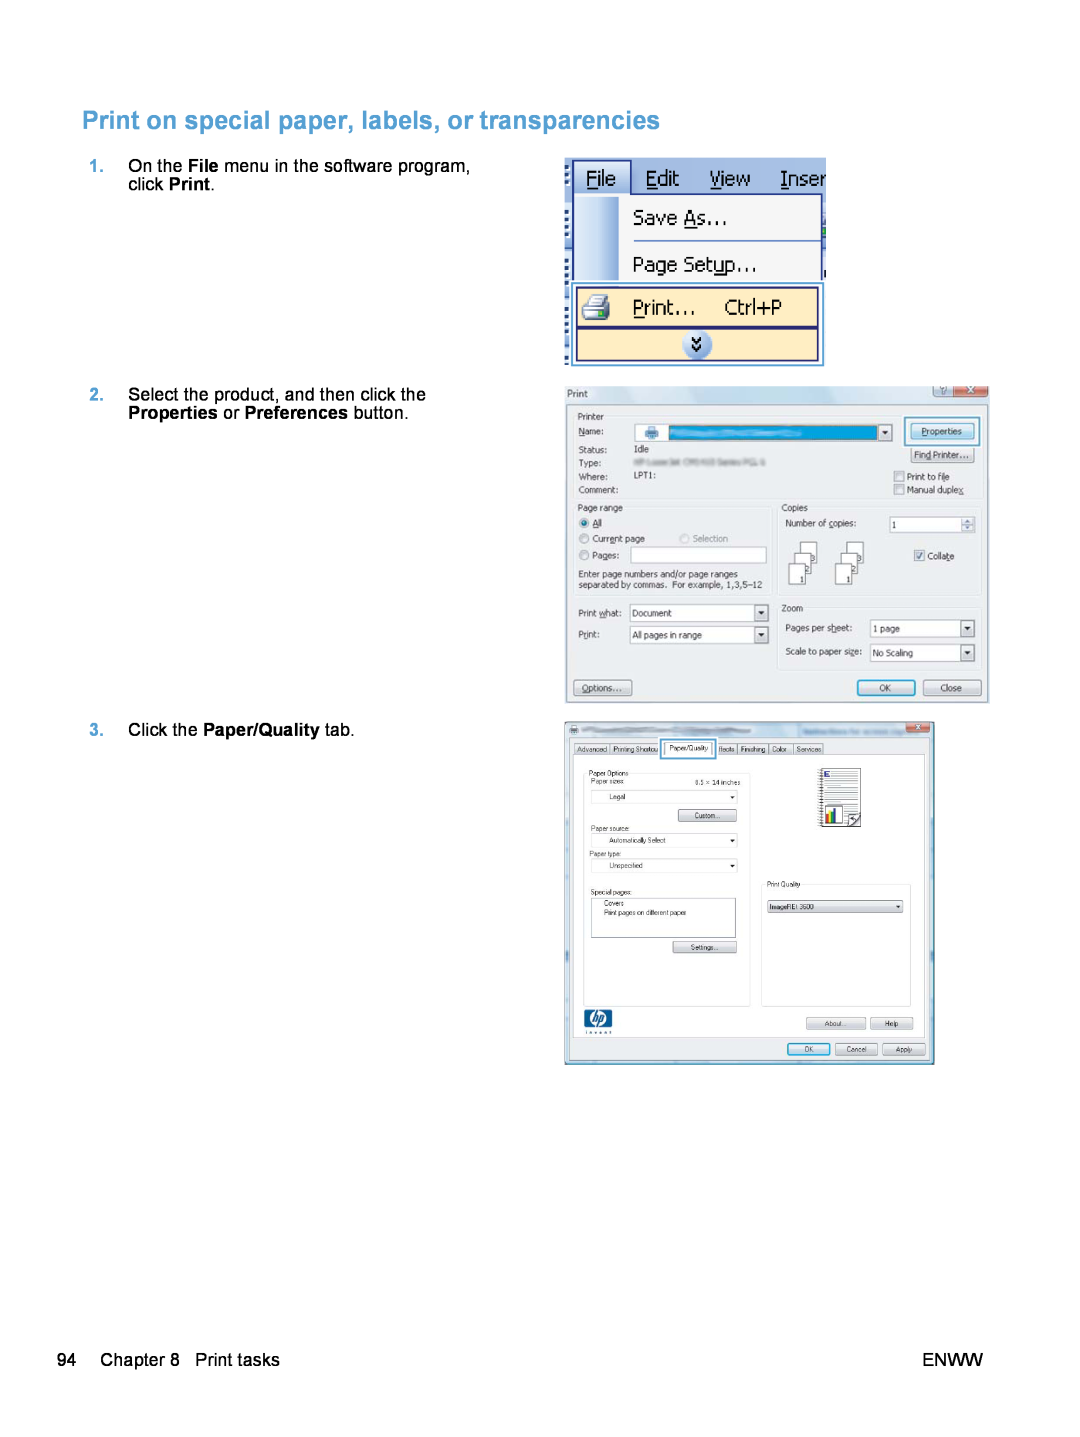 HP 100 COLOR CE866ABGJ Print on special paper, labels, or transparencies, Click the Paper/Quality tab, Print tasks, Enww 